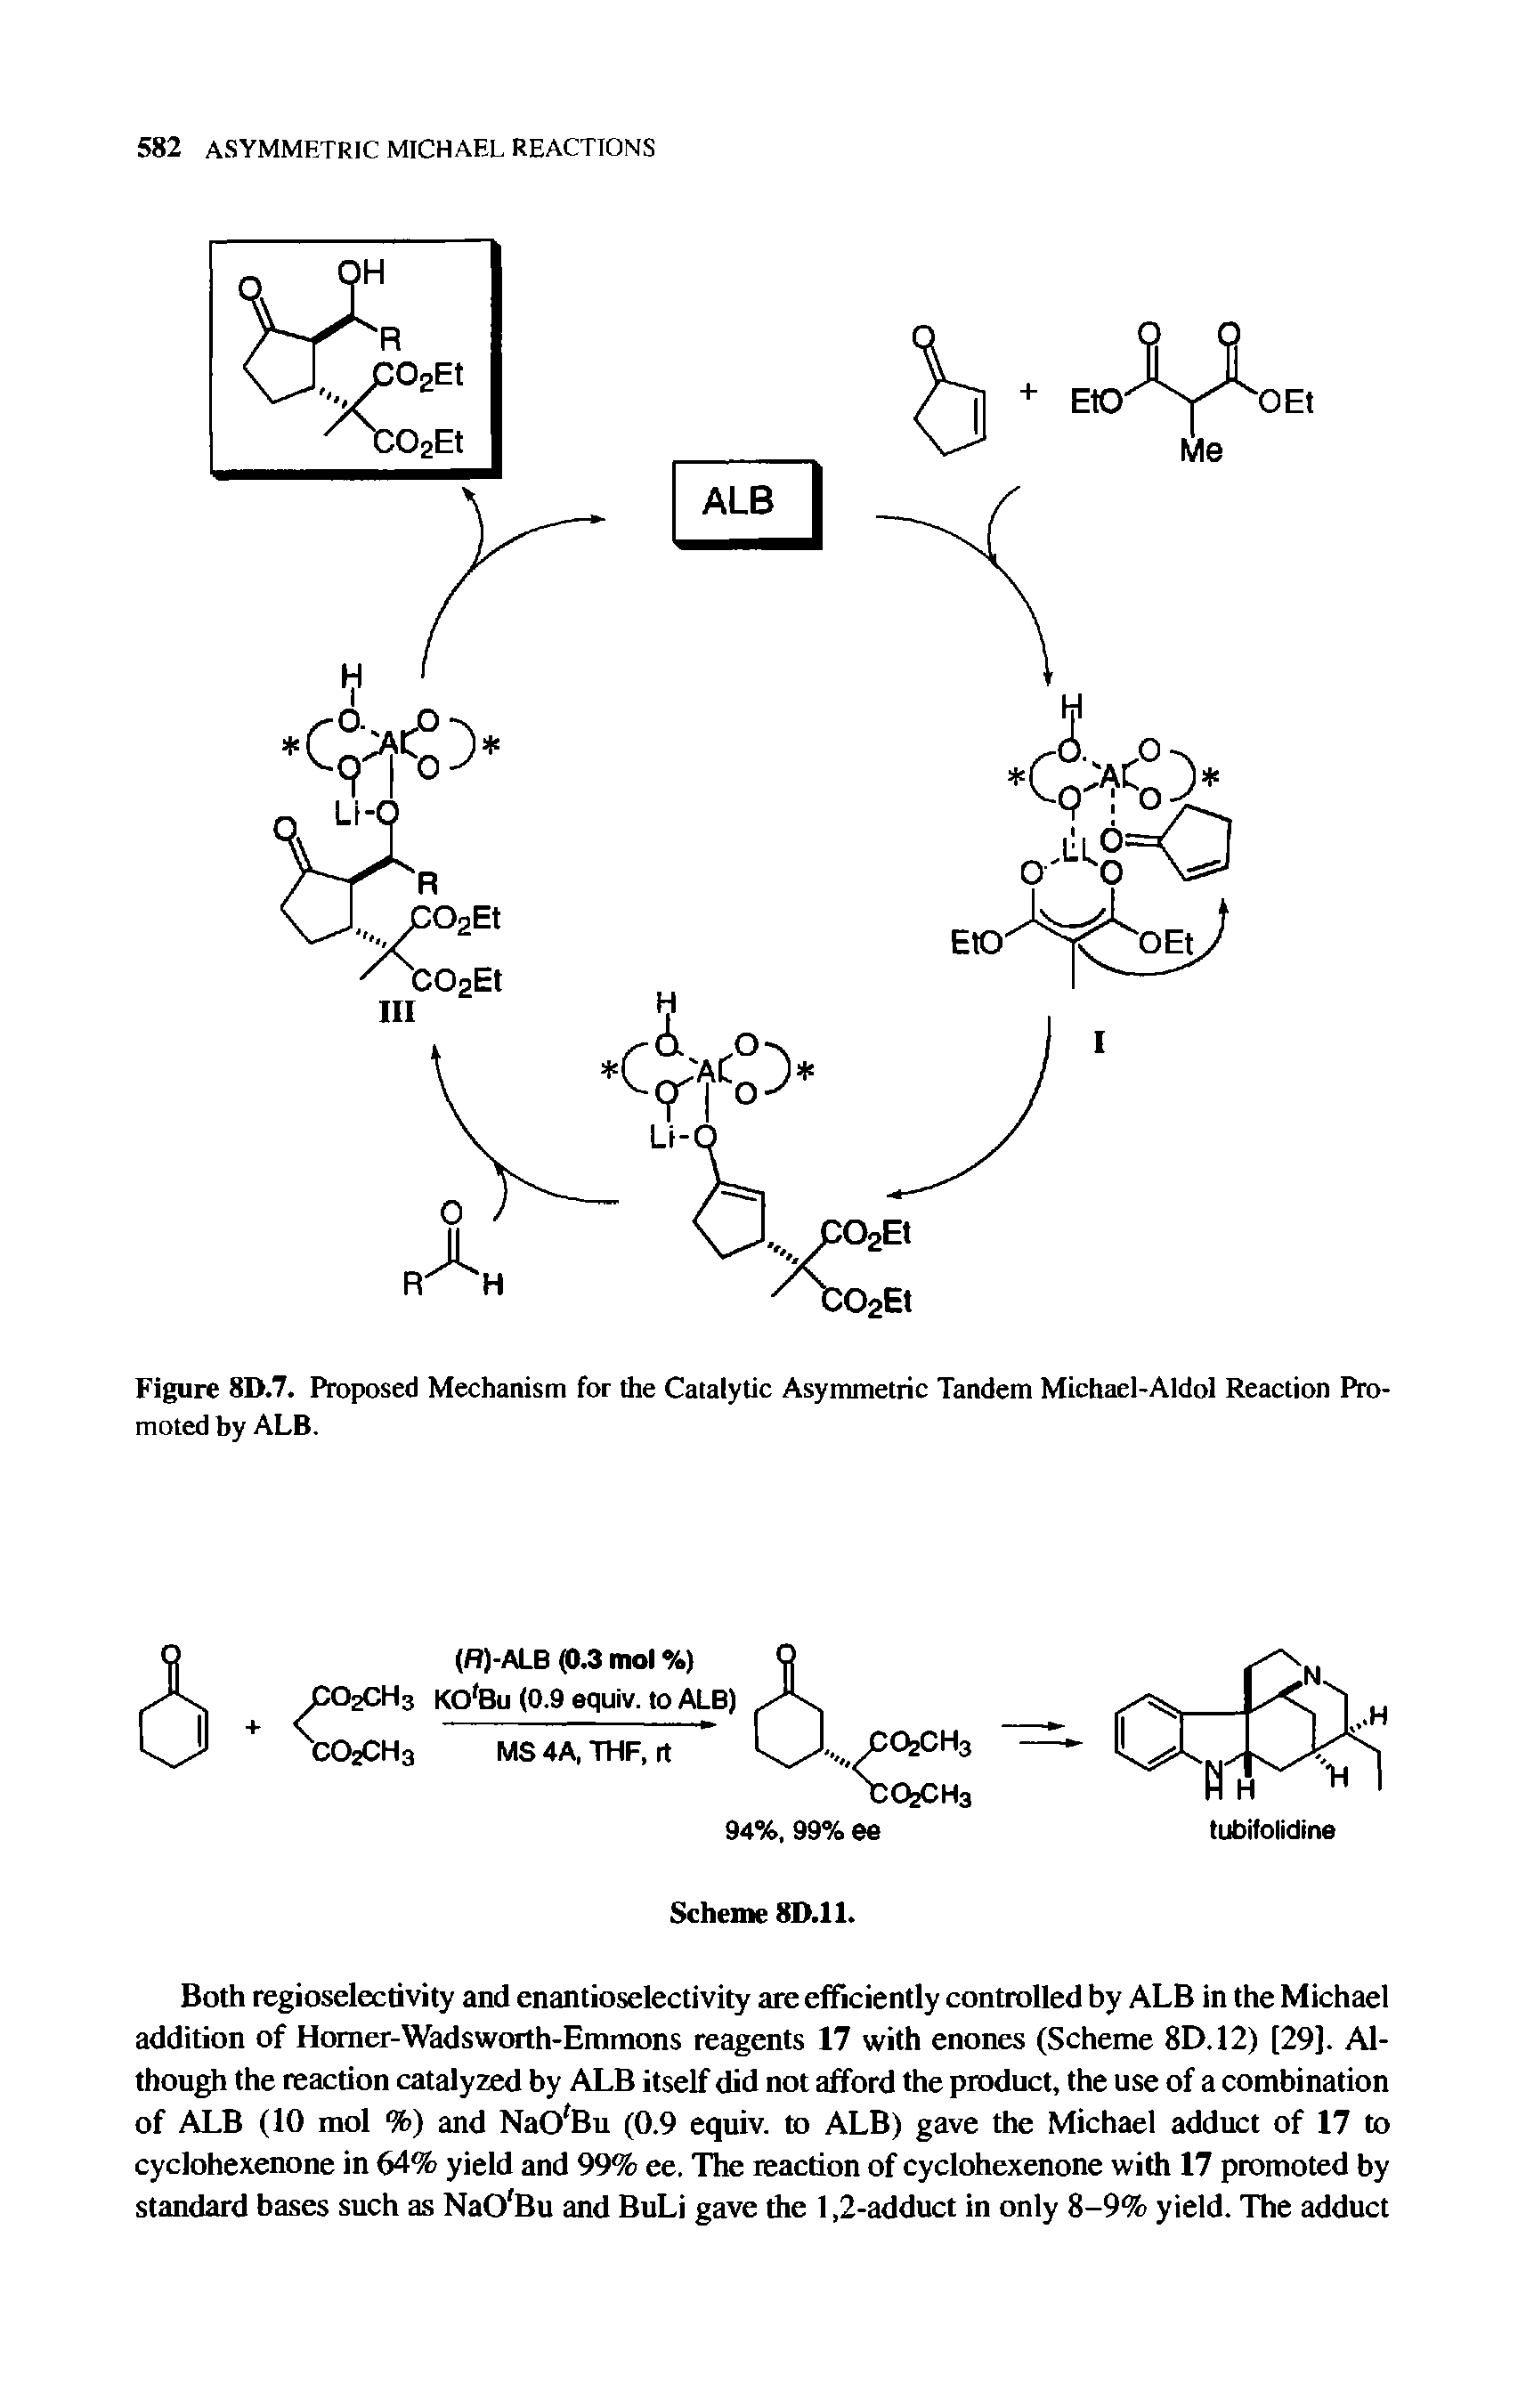 Figure 8D.7. Proposed Mechanism for the Catalytic Asymmetric Tandem Michael-Aldol Reaction Promoted by ALB.